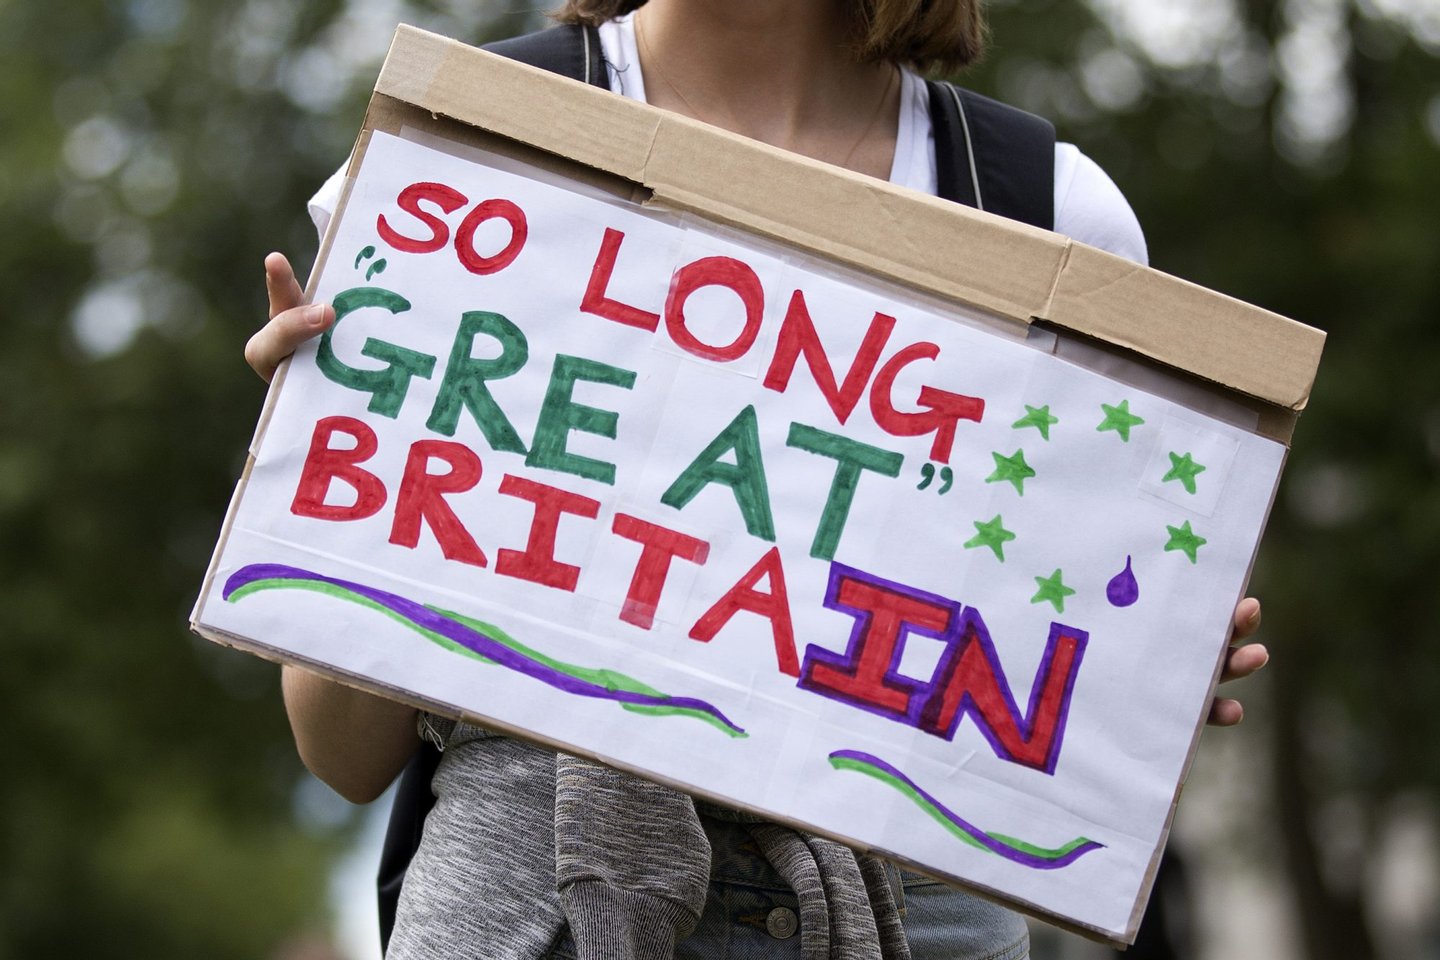 A demonstrator holds a placard that reads "So Long Great Britain" during a protest against the pro-Brexit outcome of the UK's June 23 referendum on the European Union (EU), in central London on June 25, 2016. The result of Britain's June 23 referendum vote to leave the European Union (EU) has pitted parents against children, cities against rural areas, north against south and university graduates against those with fewer qualifications. London, Scotland and Northern Ireland voted to remain in the EU but Wales and large swathes of England, particularly former industrial hubs in the north with many disaffected workers, backed a Brexit. / AFP / JUSTIN TALLIS (Photo credit should read JUSTIN TALLIS/AFP/Getty Images)